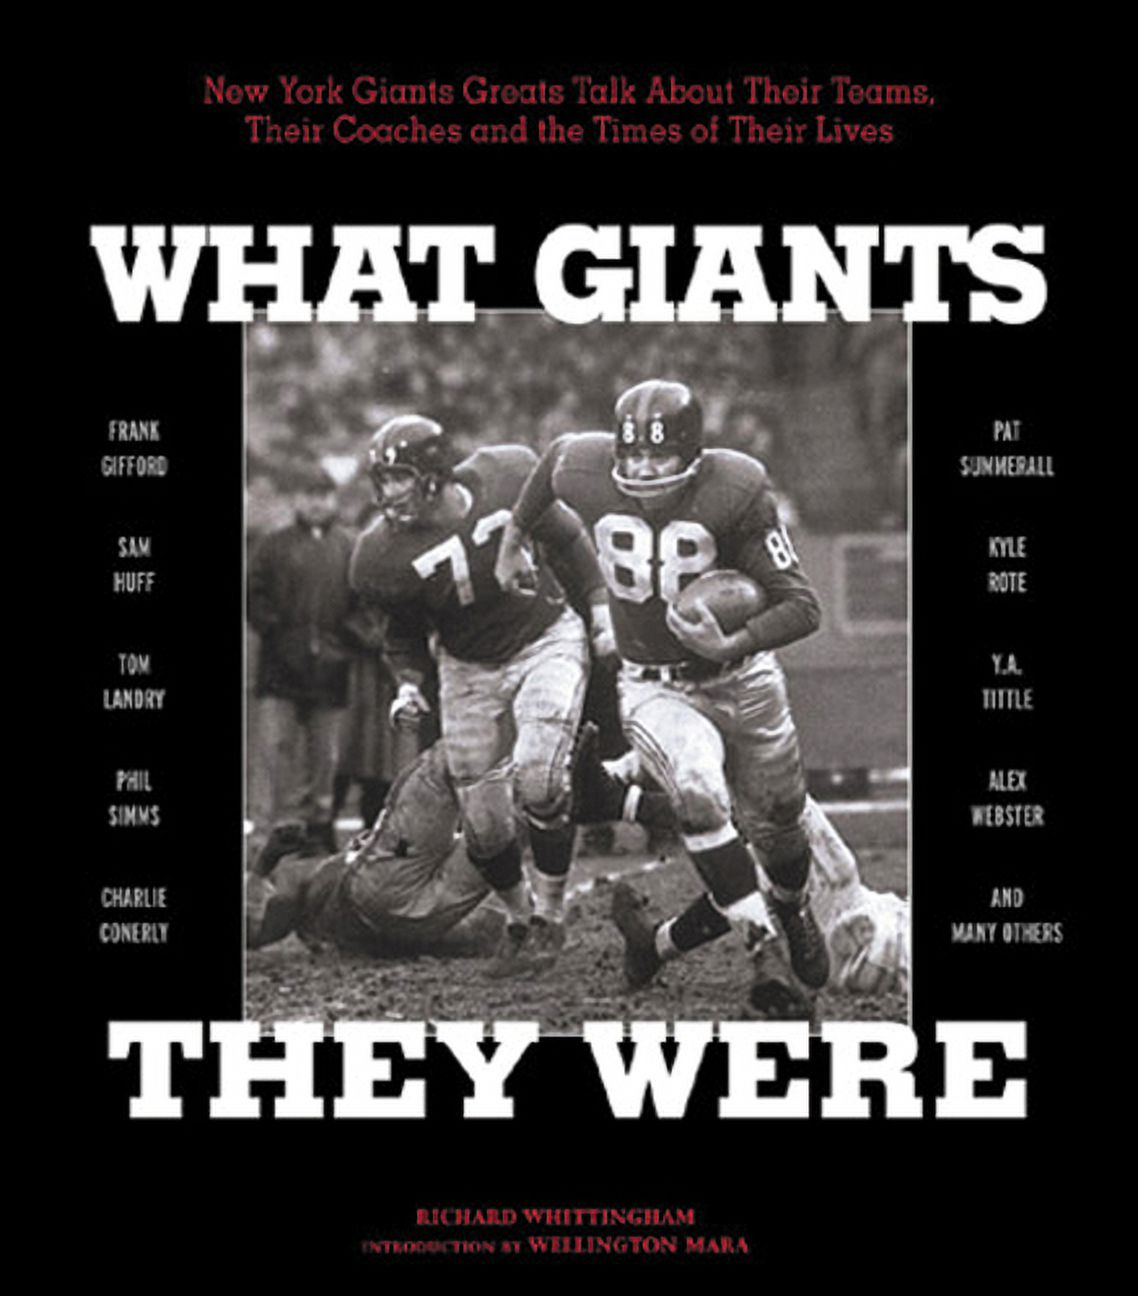 What Giants They Were : New York Giants Greats Talk About Their Teams, Their Coaches and the Times of Their Lives (Hardcover) - image 1 of 1